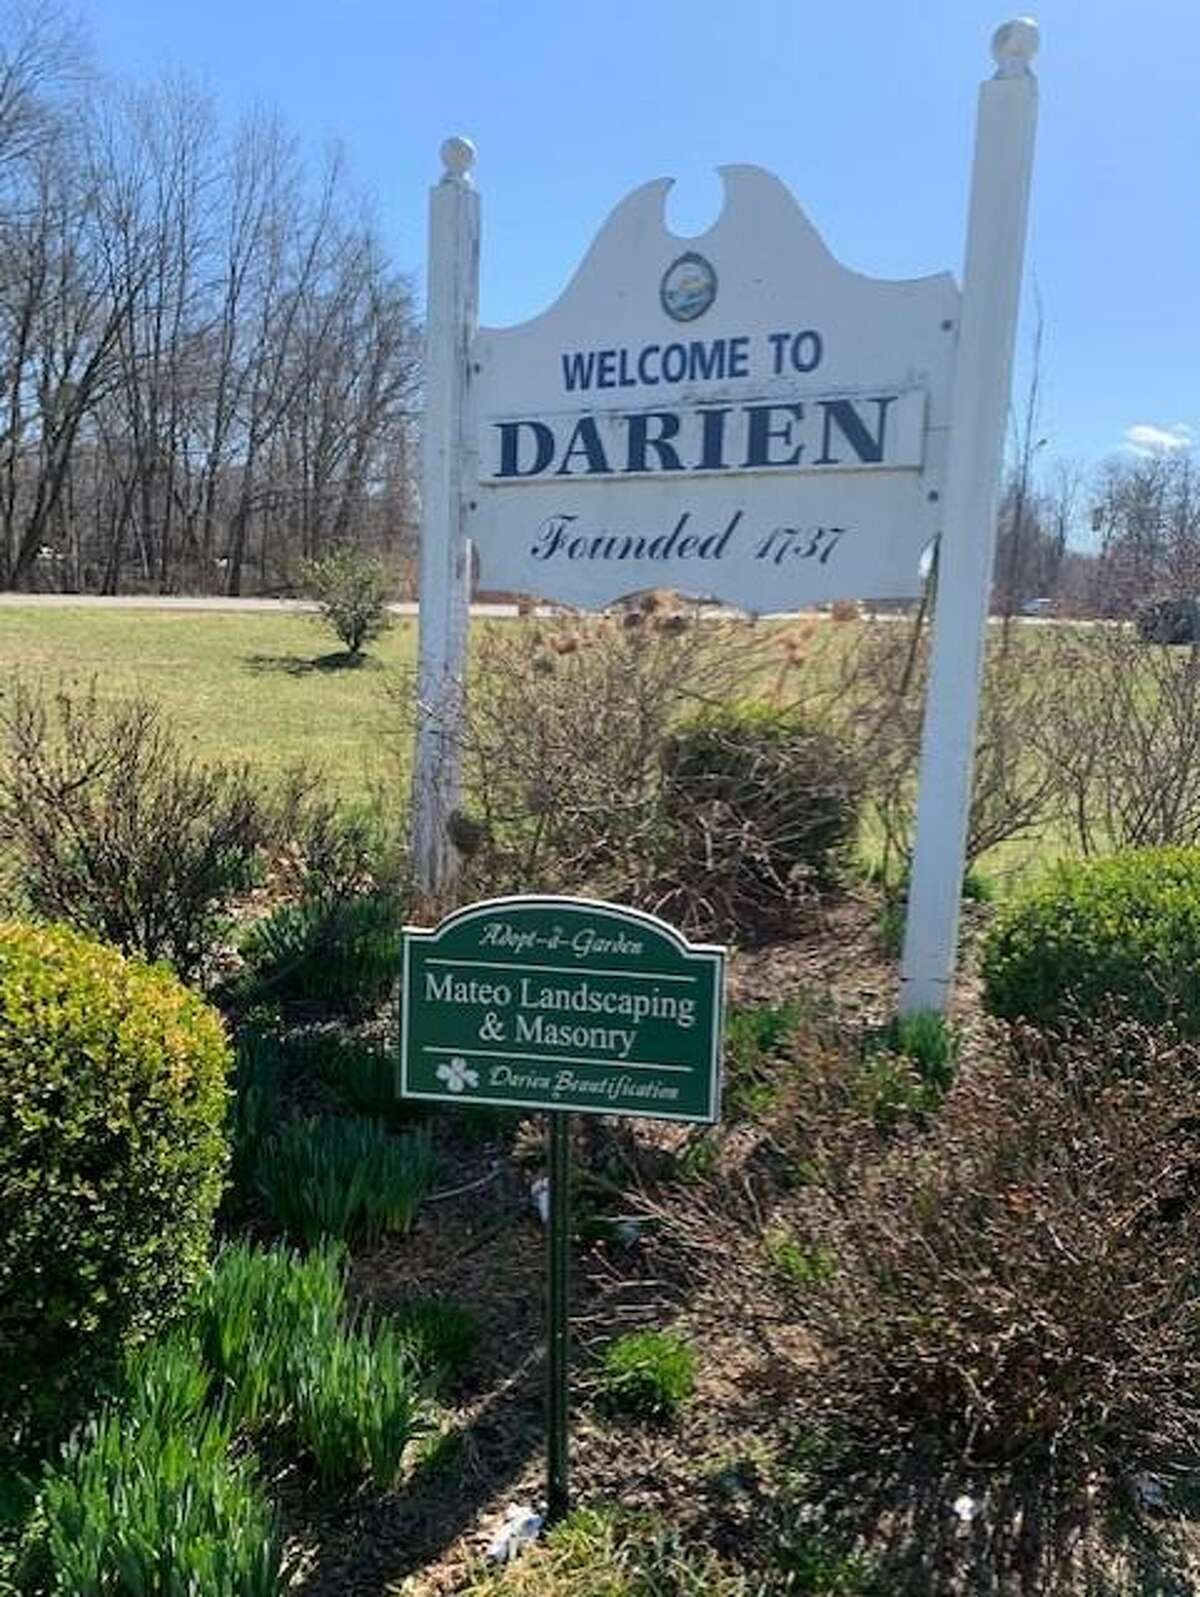 The Darien Beautification Commission is inviting new landscapers to join its Adopt A Garden Program. Traffic islands and garden spots are available for planting in the spring season. The commission provides signs that identify the landscaper and offer publicity.